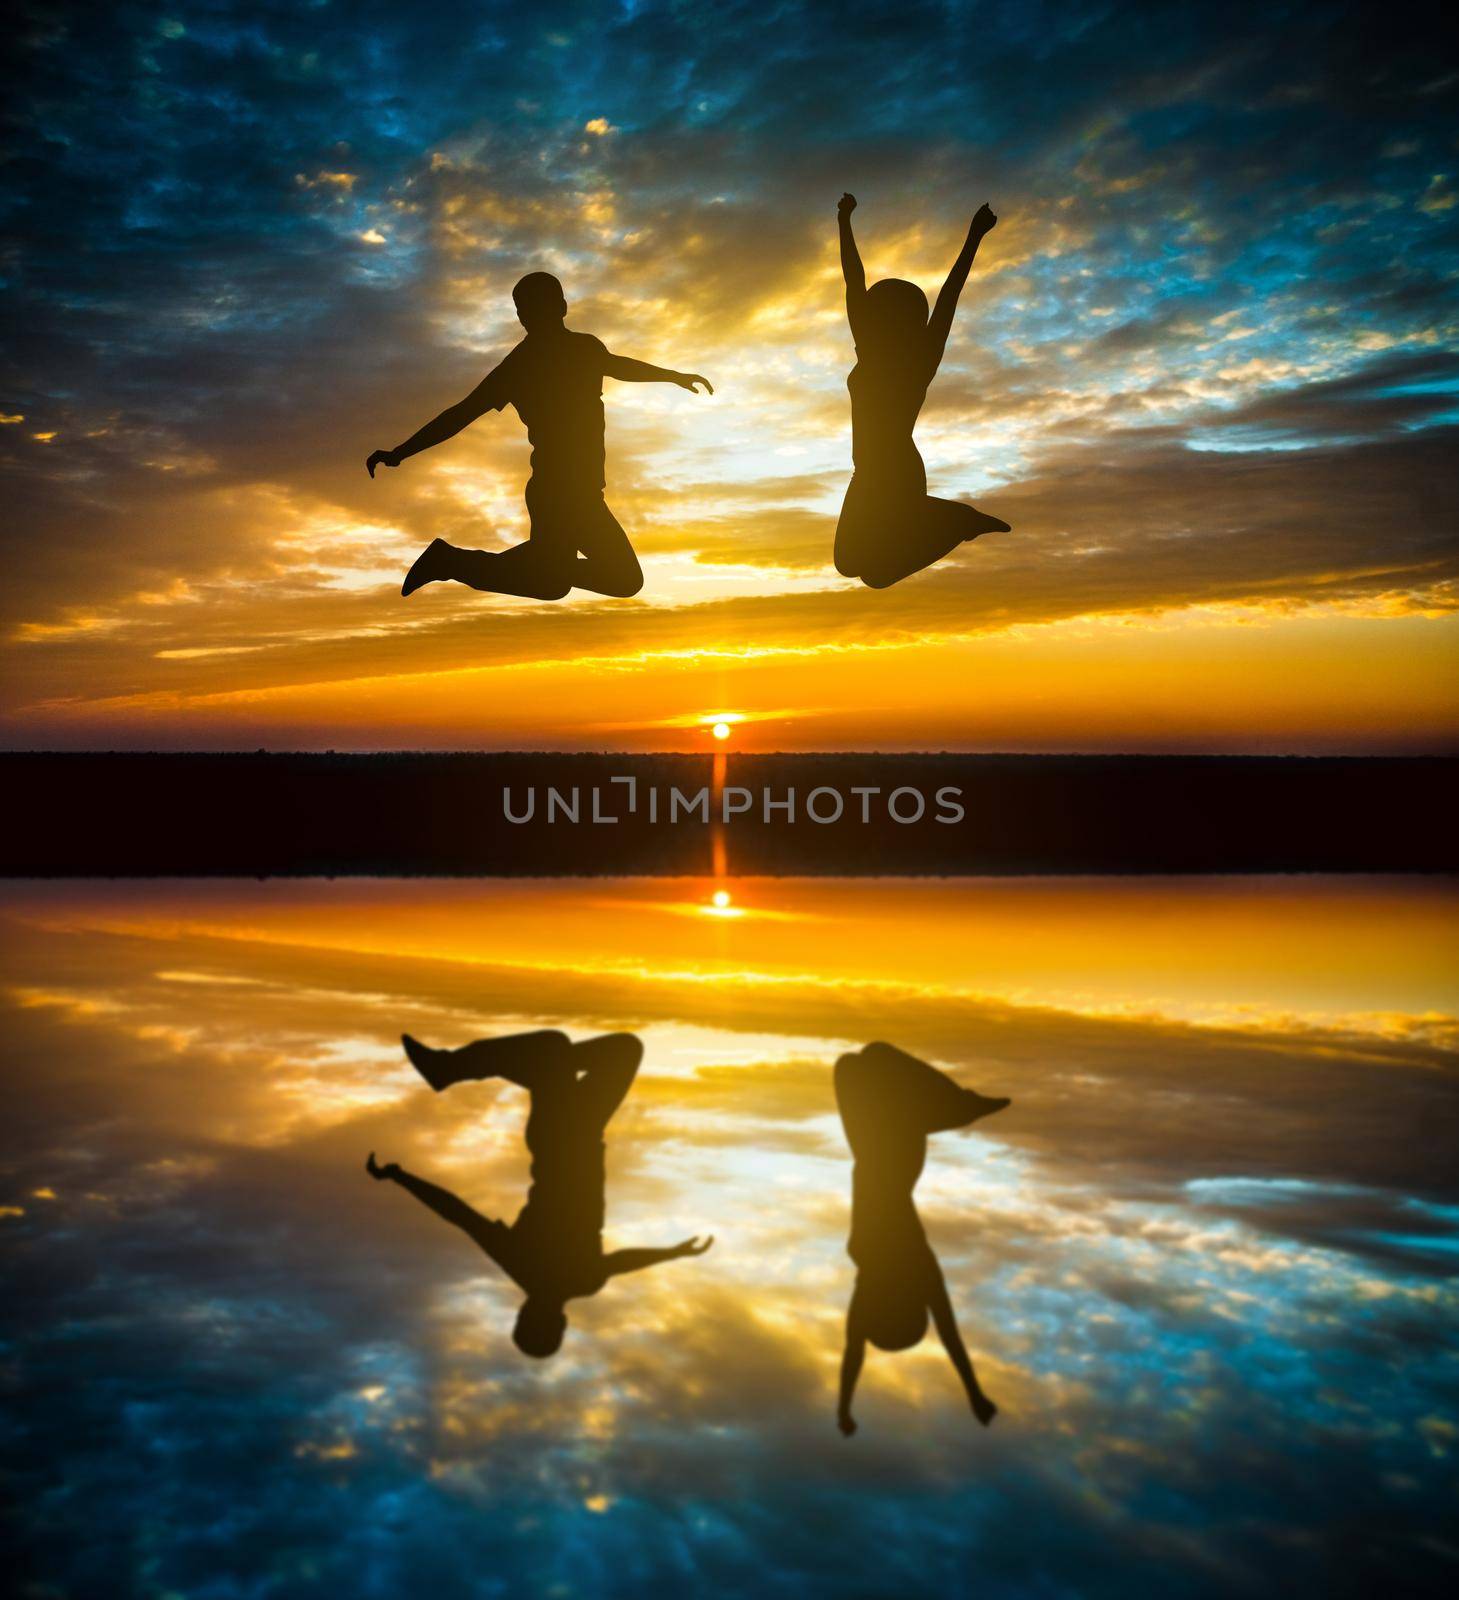 couple jumping in sunset by tan4ikk1